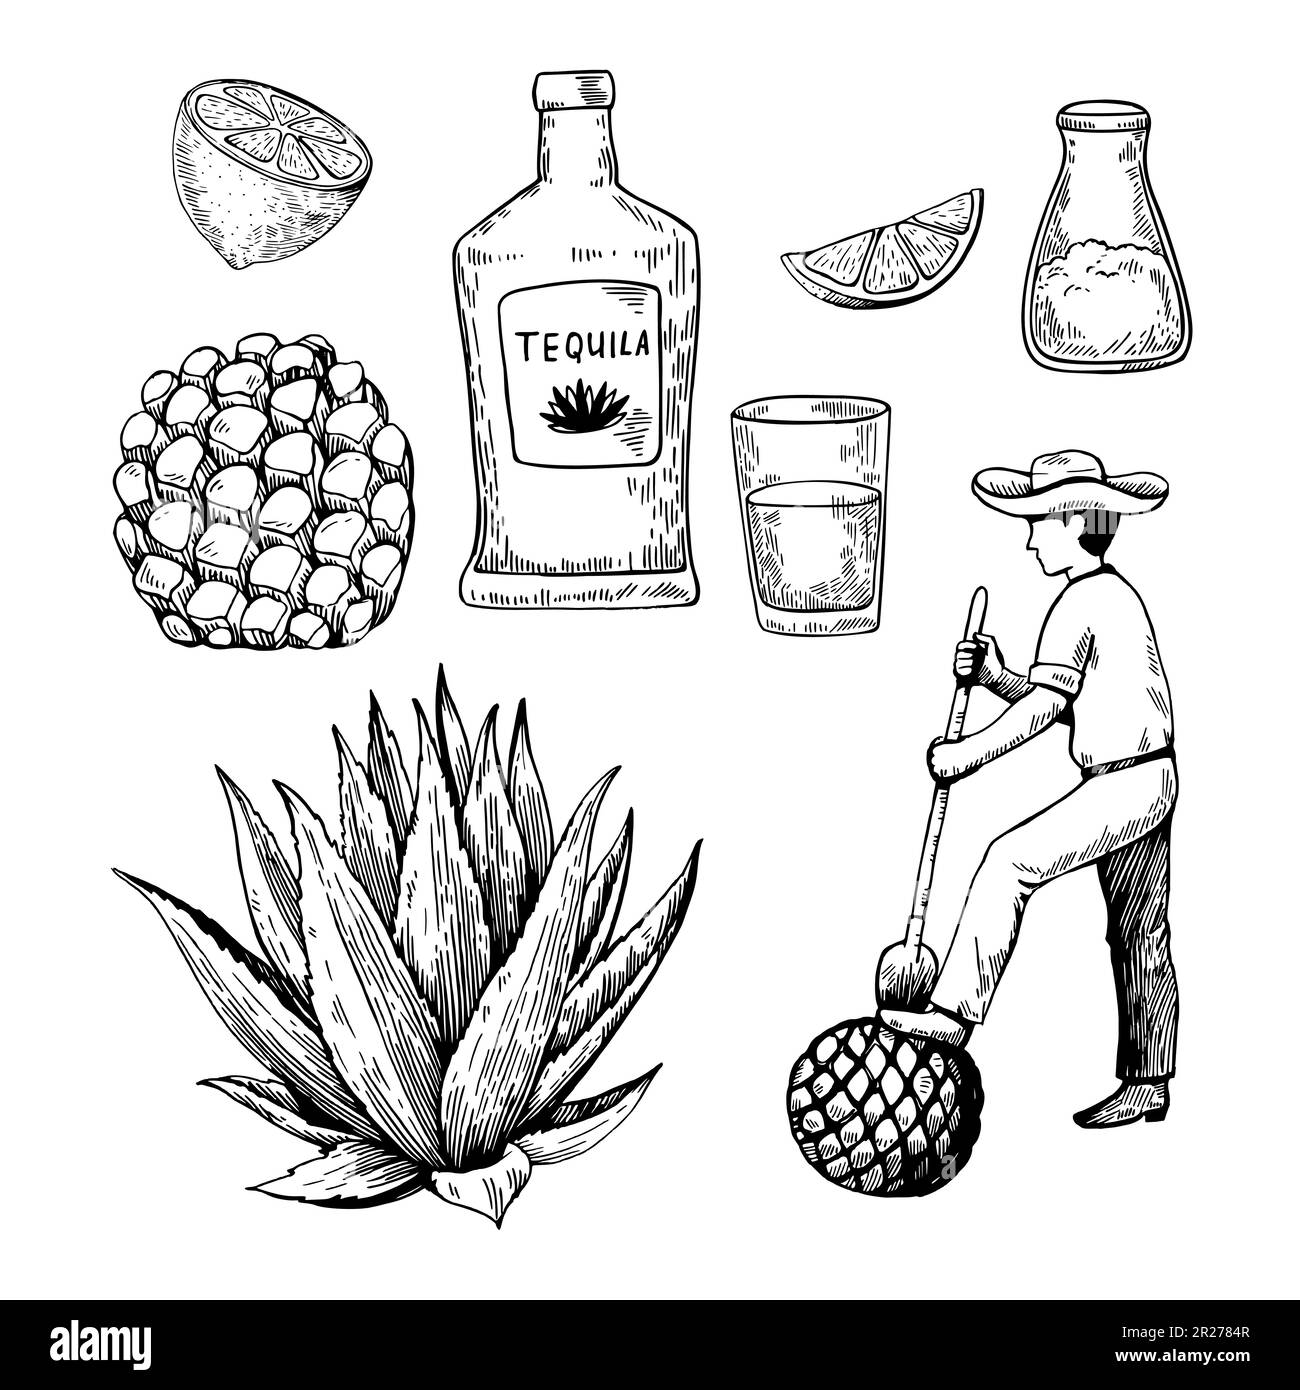 Hand drawn illustration in engraving retro style. Tequila bottle, agave plant and root, shot glass and ingredients. Vector black and white sketch. Stock Vector